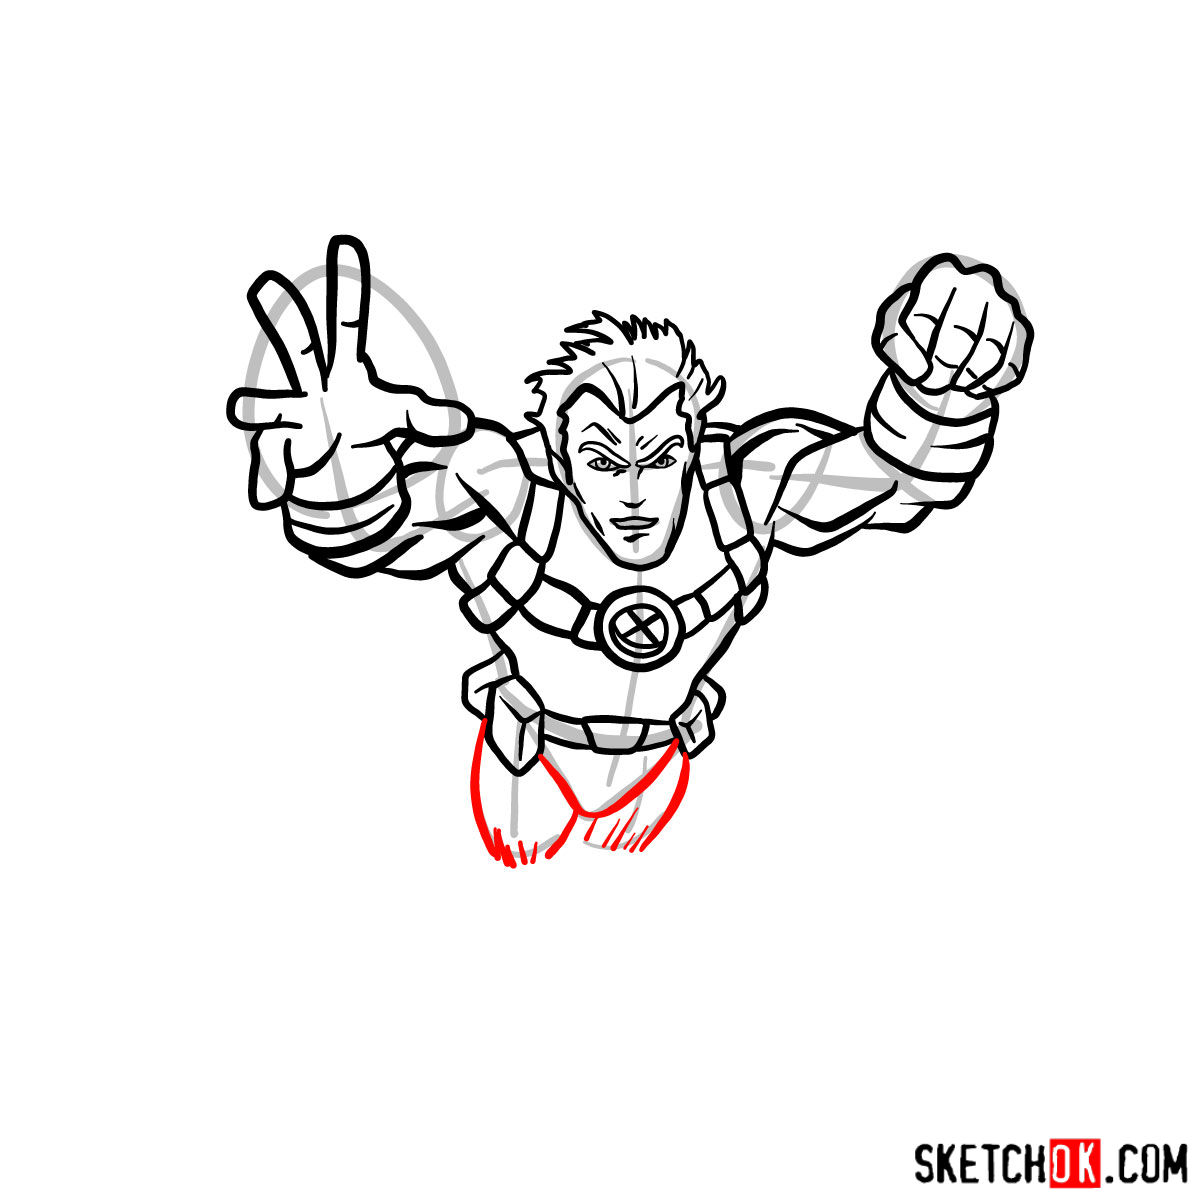 How to draw Cannonball, a mutant from X-Men series - step 09